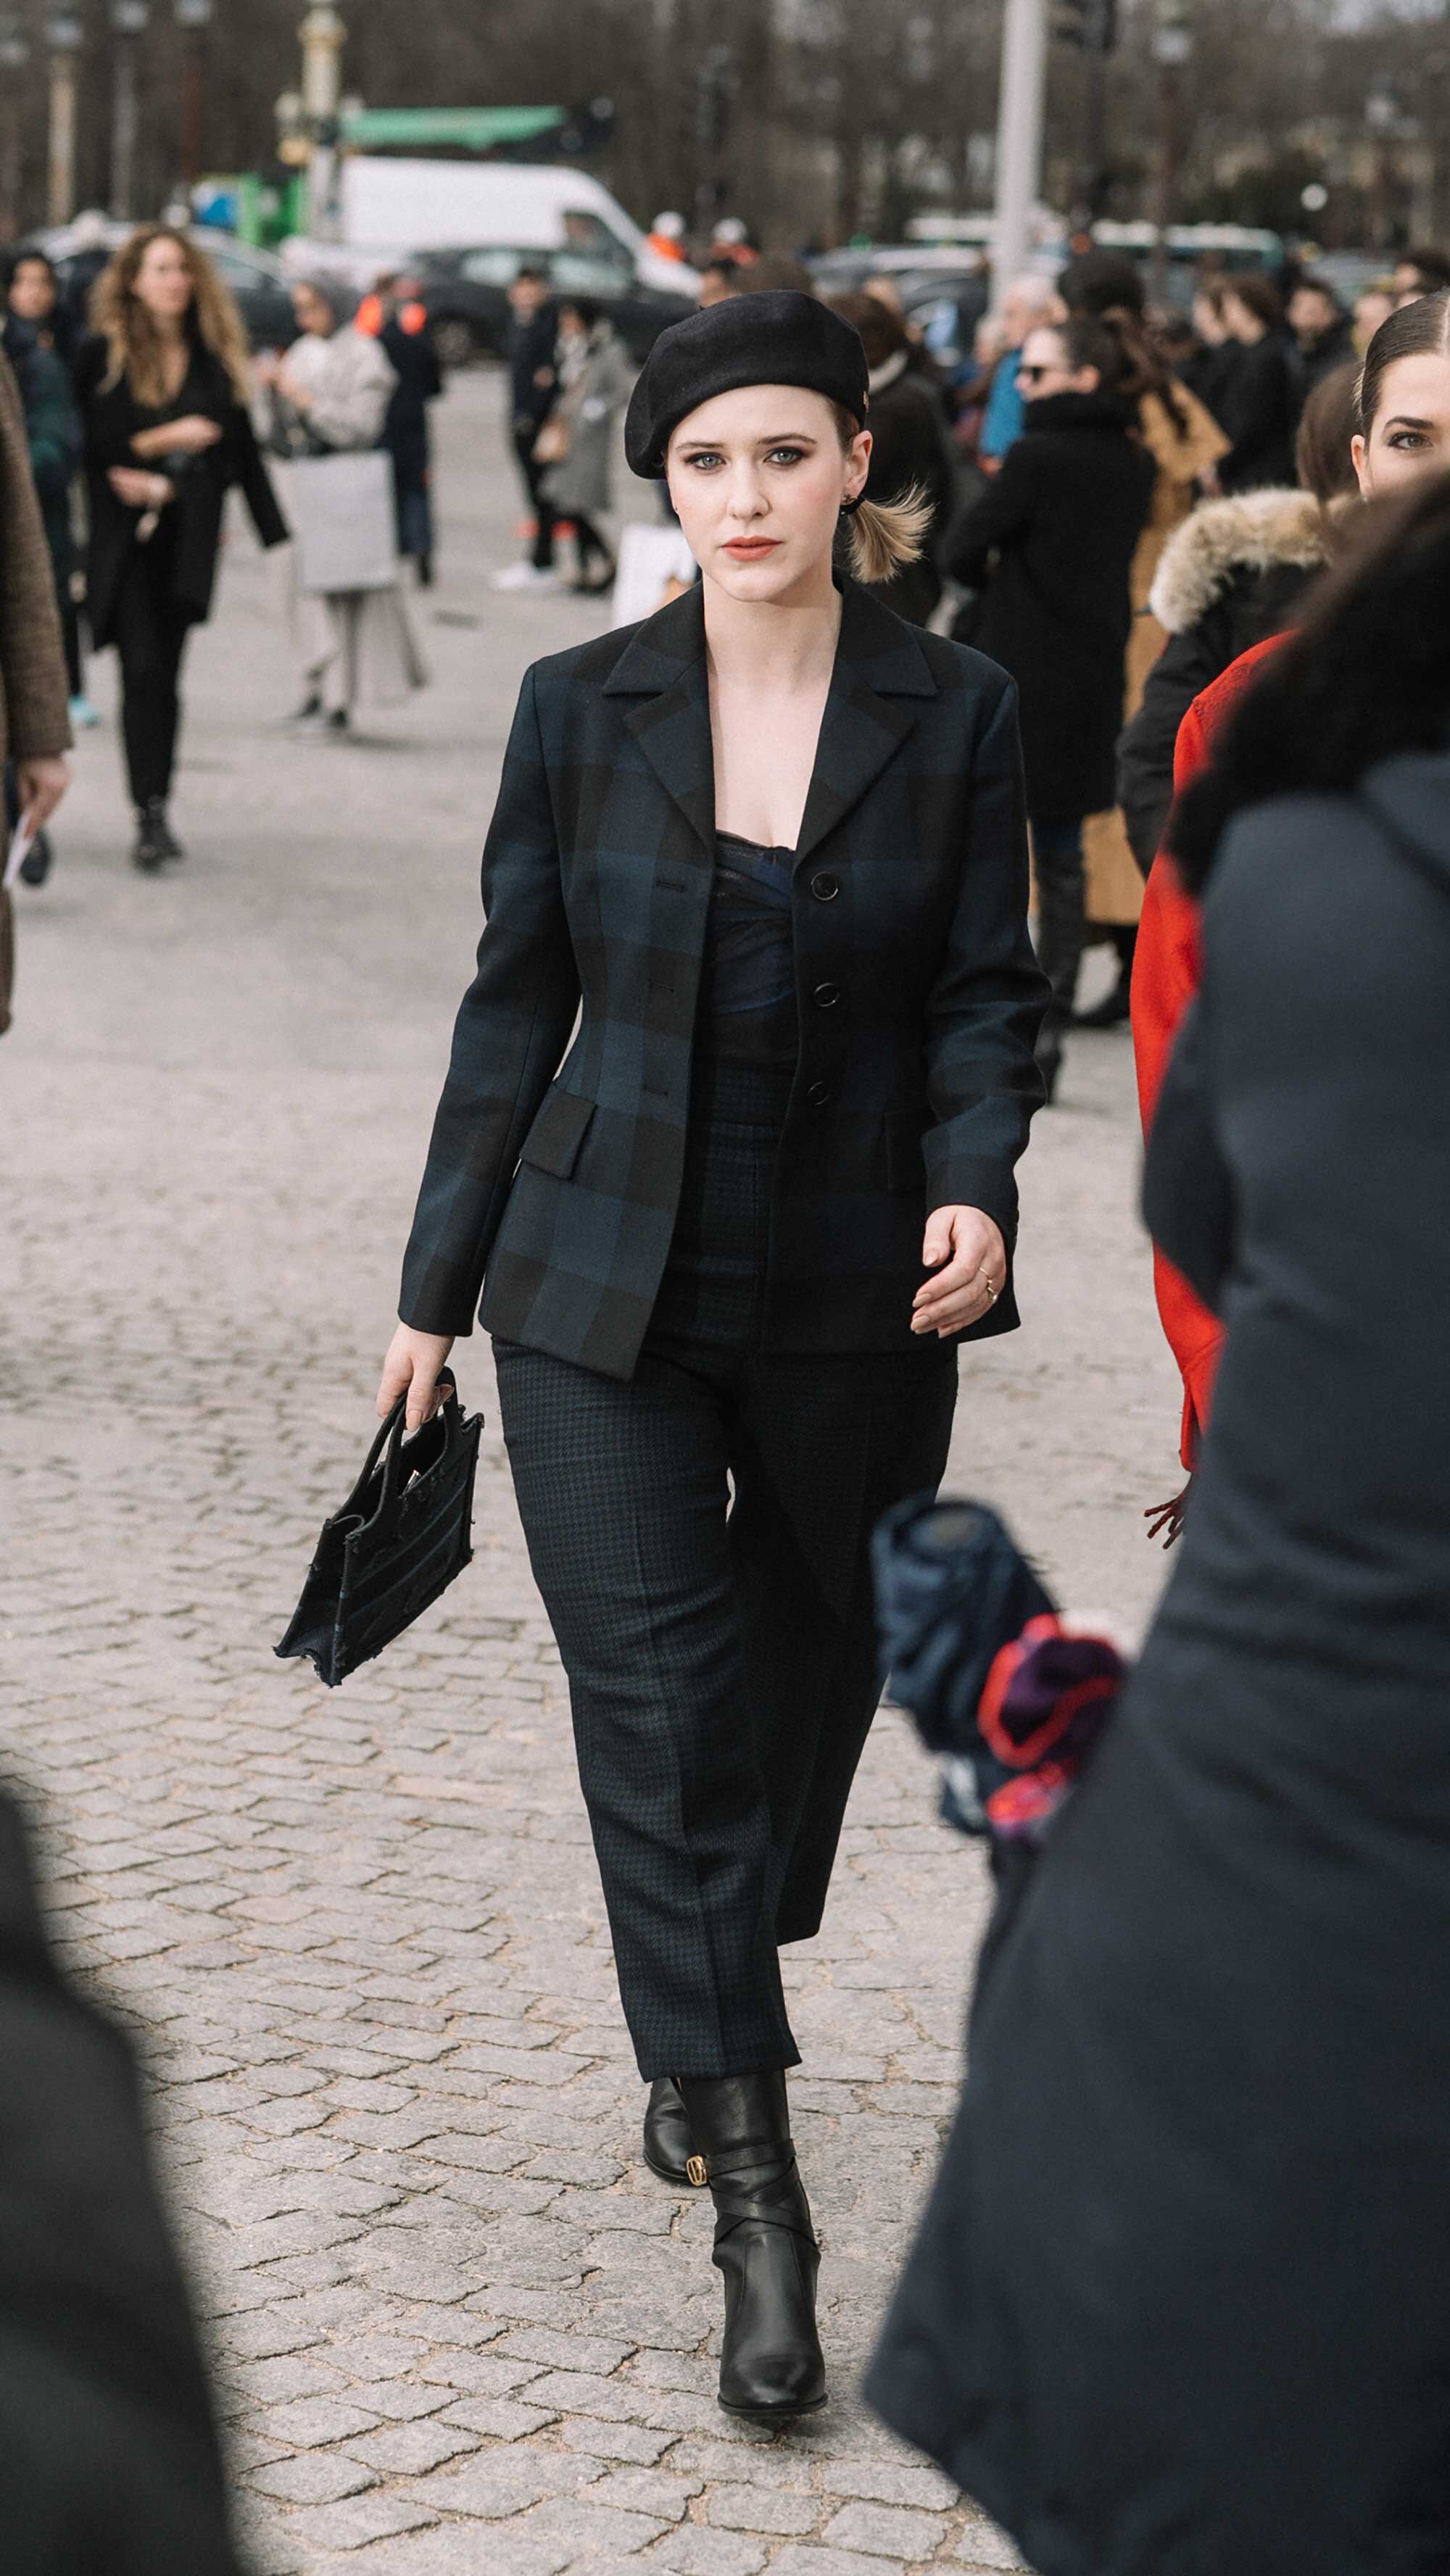 Best outfits Dior Show during Paris Fashion Week Street Style Day One -18.jpg